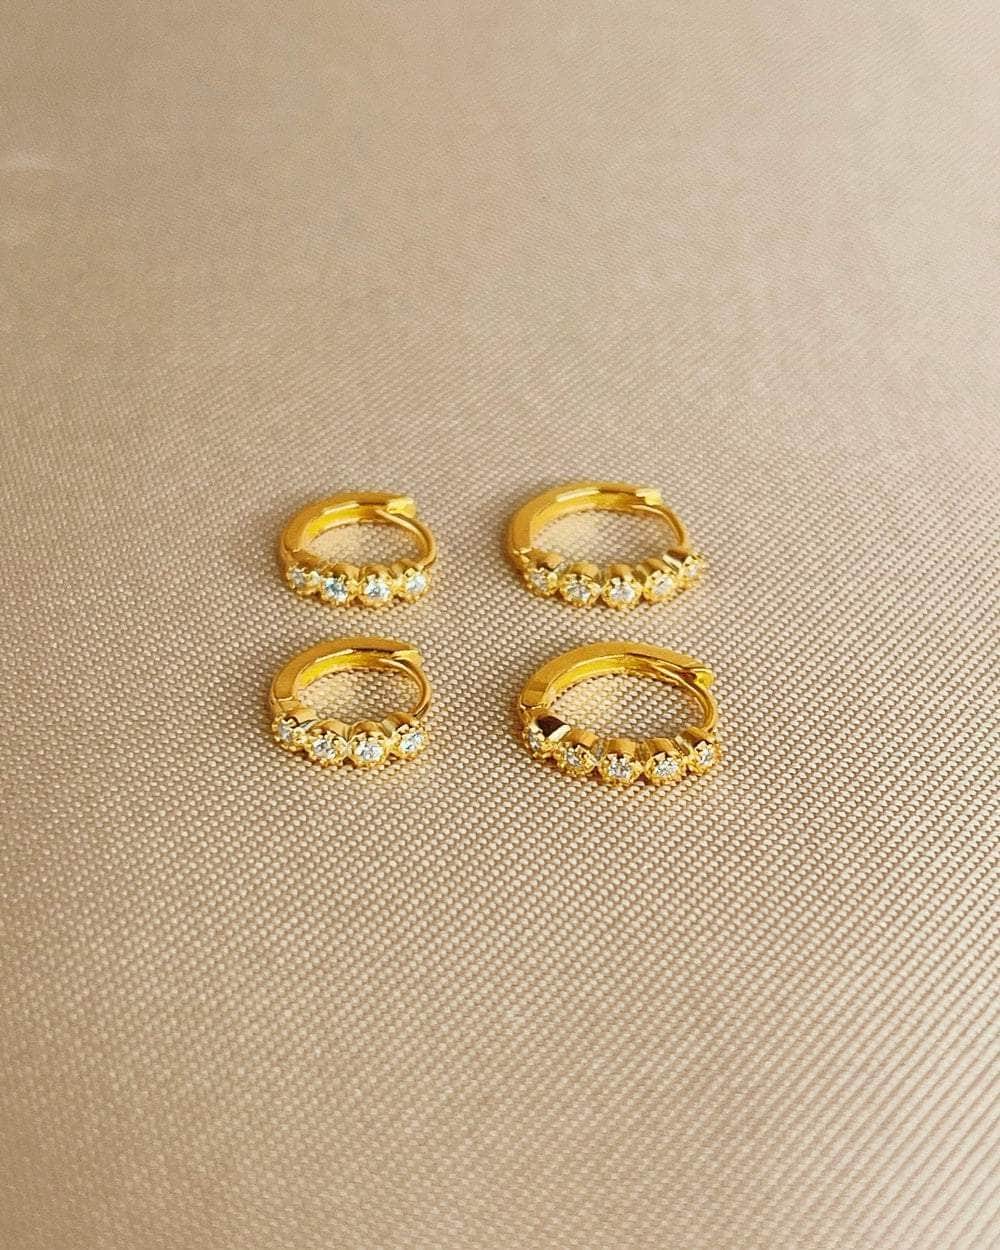 So Dainty Co. Huggies / Hoops Patricia Gold Huggies (Choose 1 — 6mm / 8mm) Gold Plated 925 Sterling Silver Jewelry